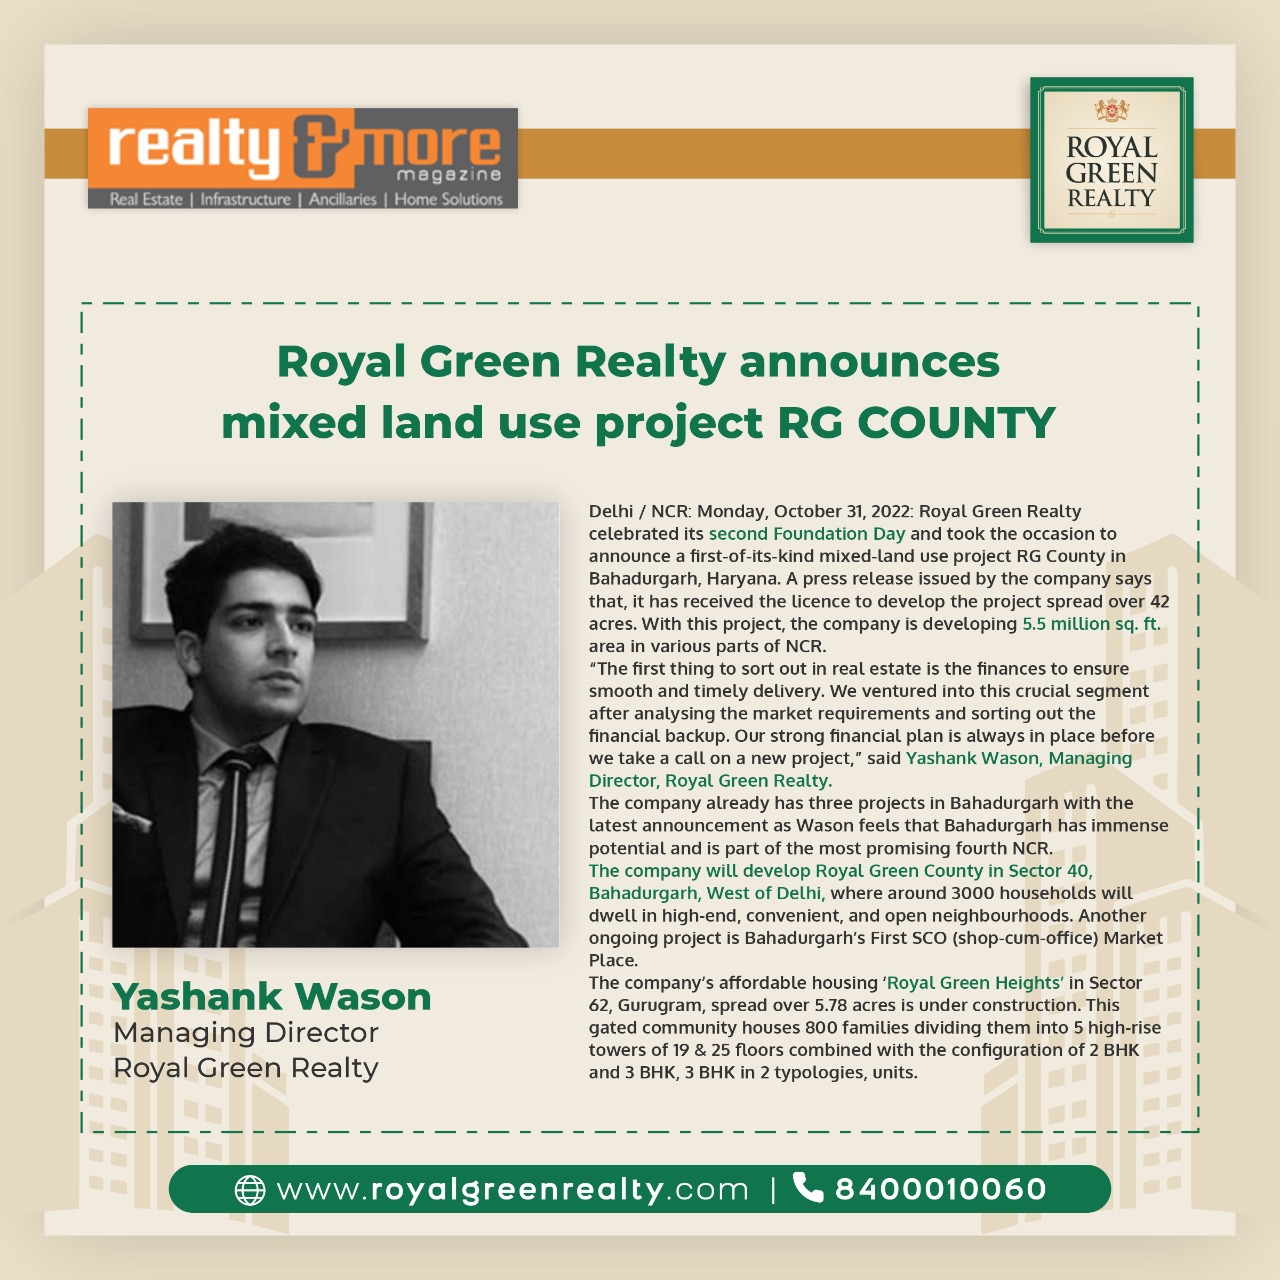 Royal Green Realty announces mixed land use project RG country